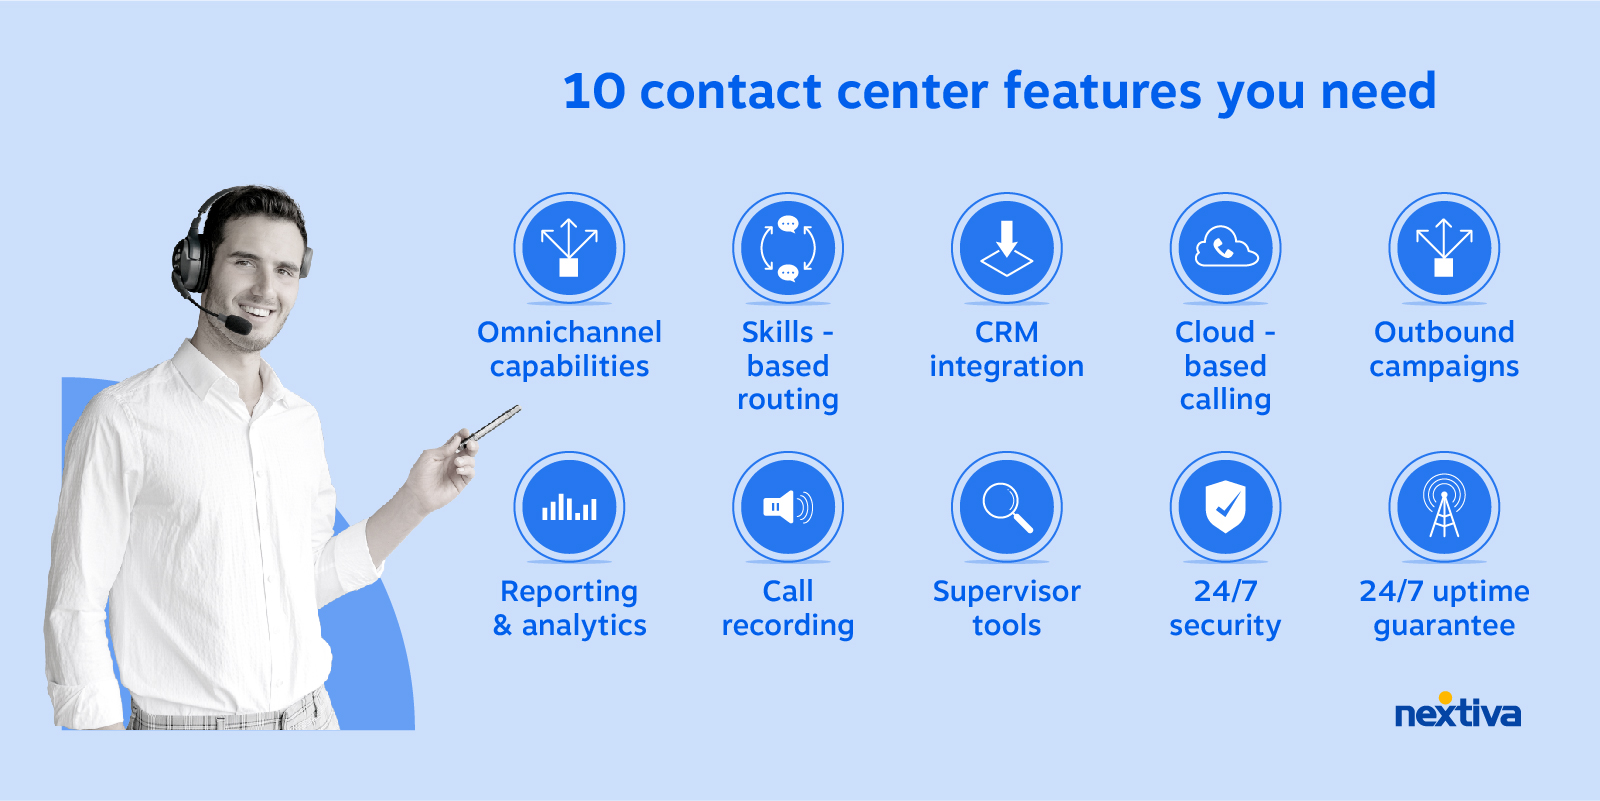 Contact center features